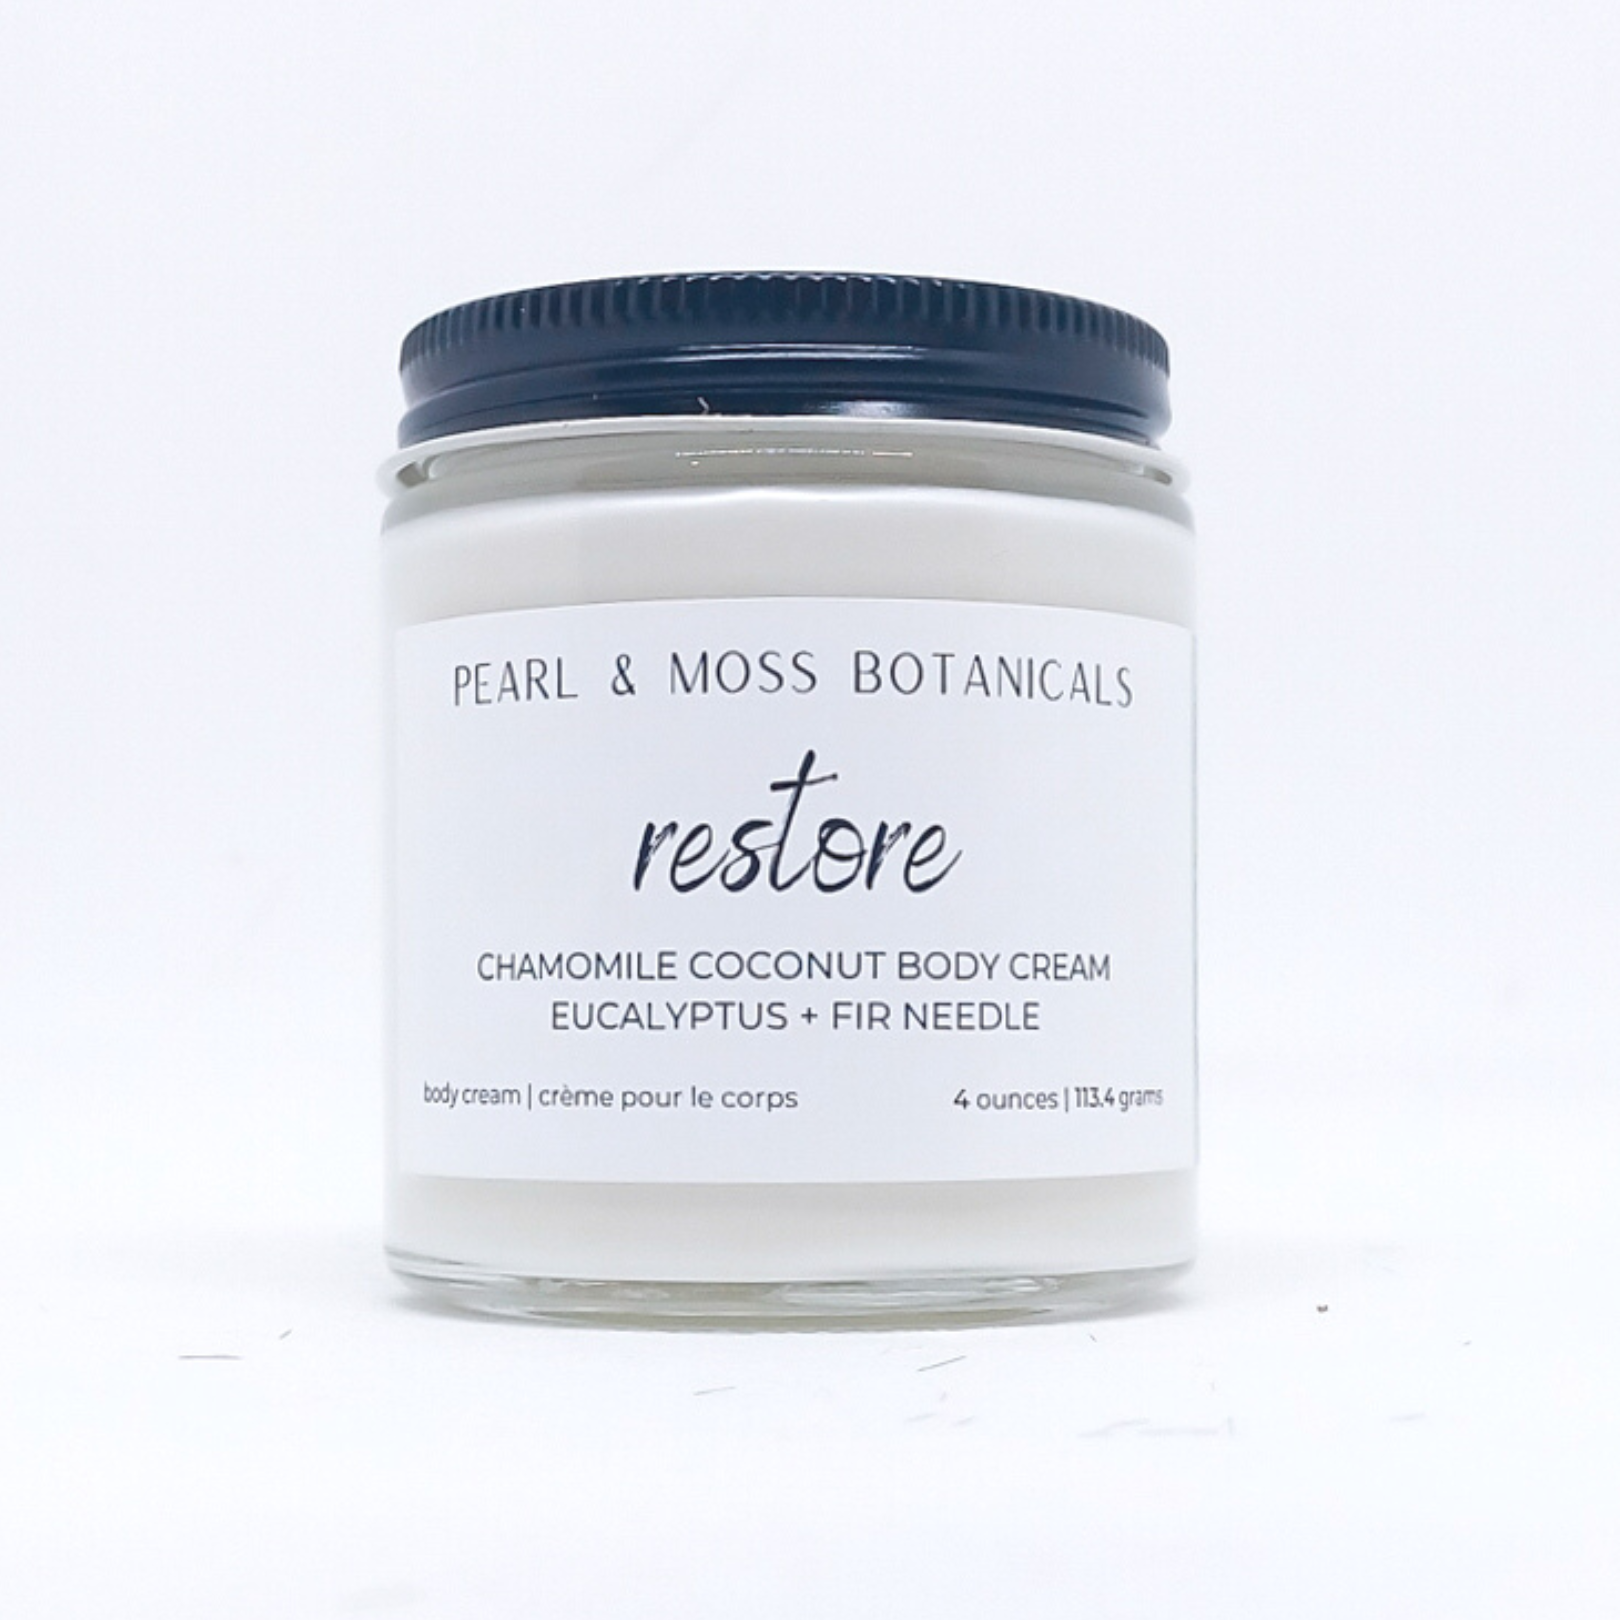 RESTORE: Fresh, woodsy and medicinal, the RESTORE blend features essential oils of fir needle and eucalyptus.  Light and smooth, the Chamomile Coconut Body Cream is softening and conditioning for the skin, with extra soothing effects from chamomile extract. Rich and luxurious, tucuma and babassu butter shine in this body cream, bringing a velvety smooth finish to your skin, while providing delicious hydration to your skin, courtesy of coconut water.